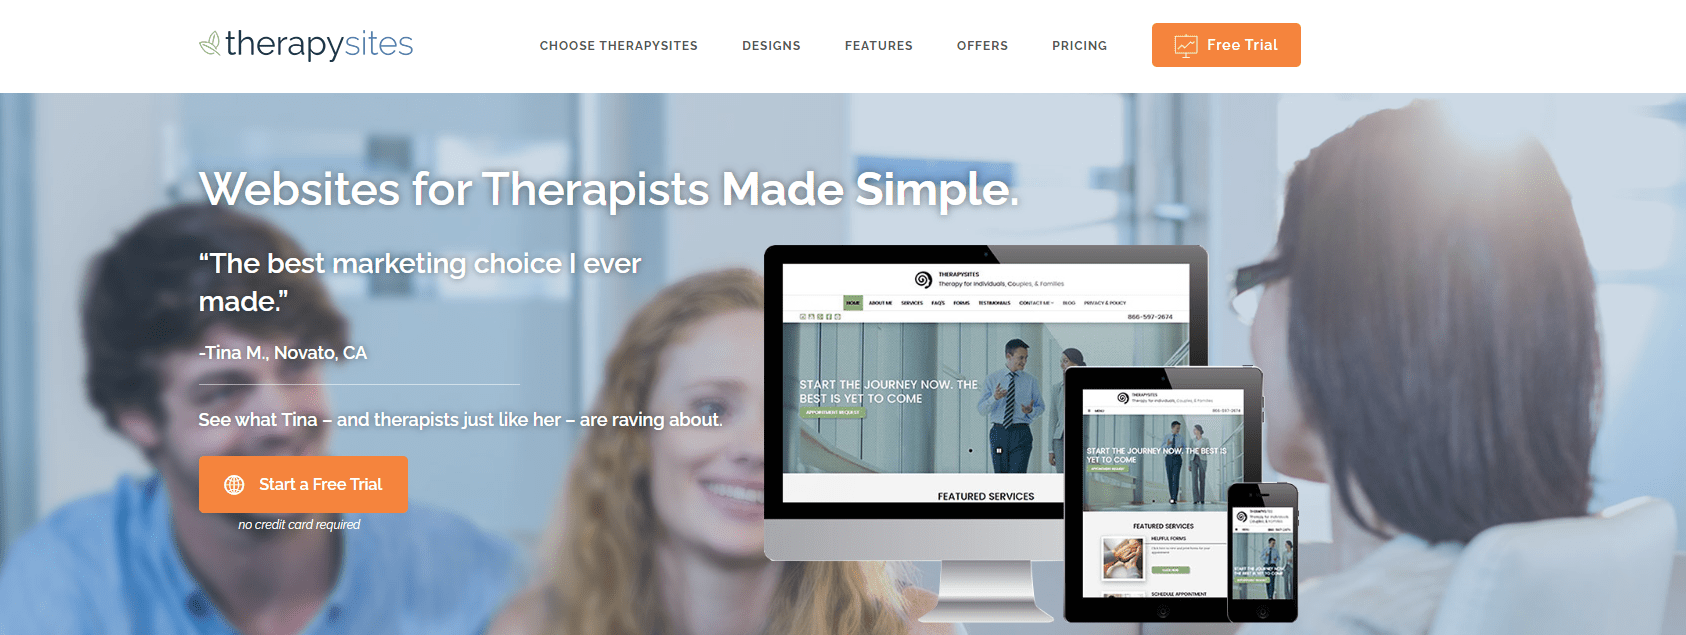 Therapysites Overview - Best Website Builders For Therapists